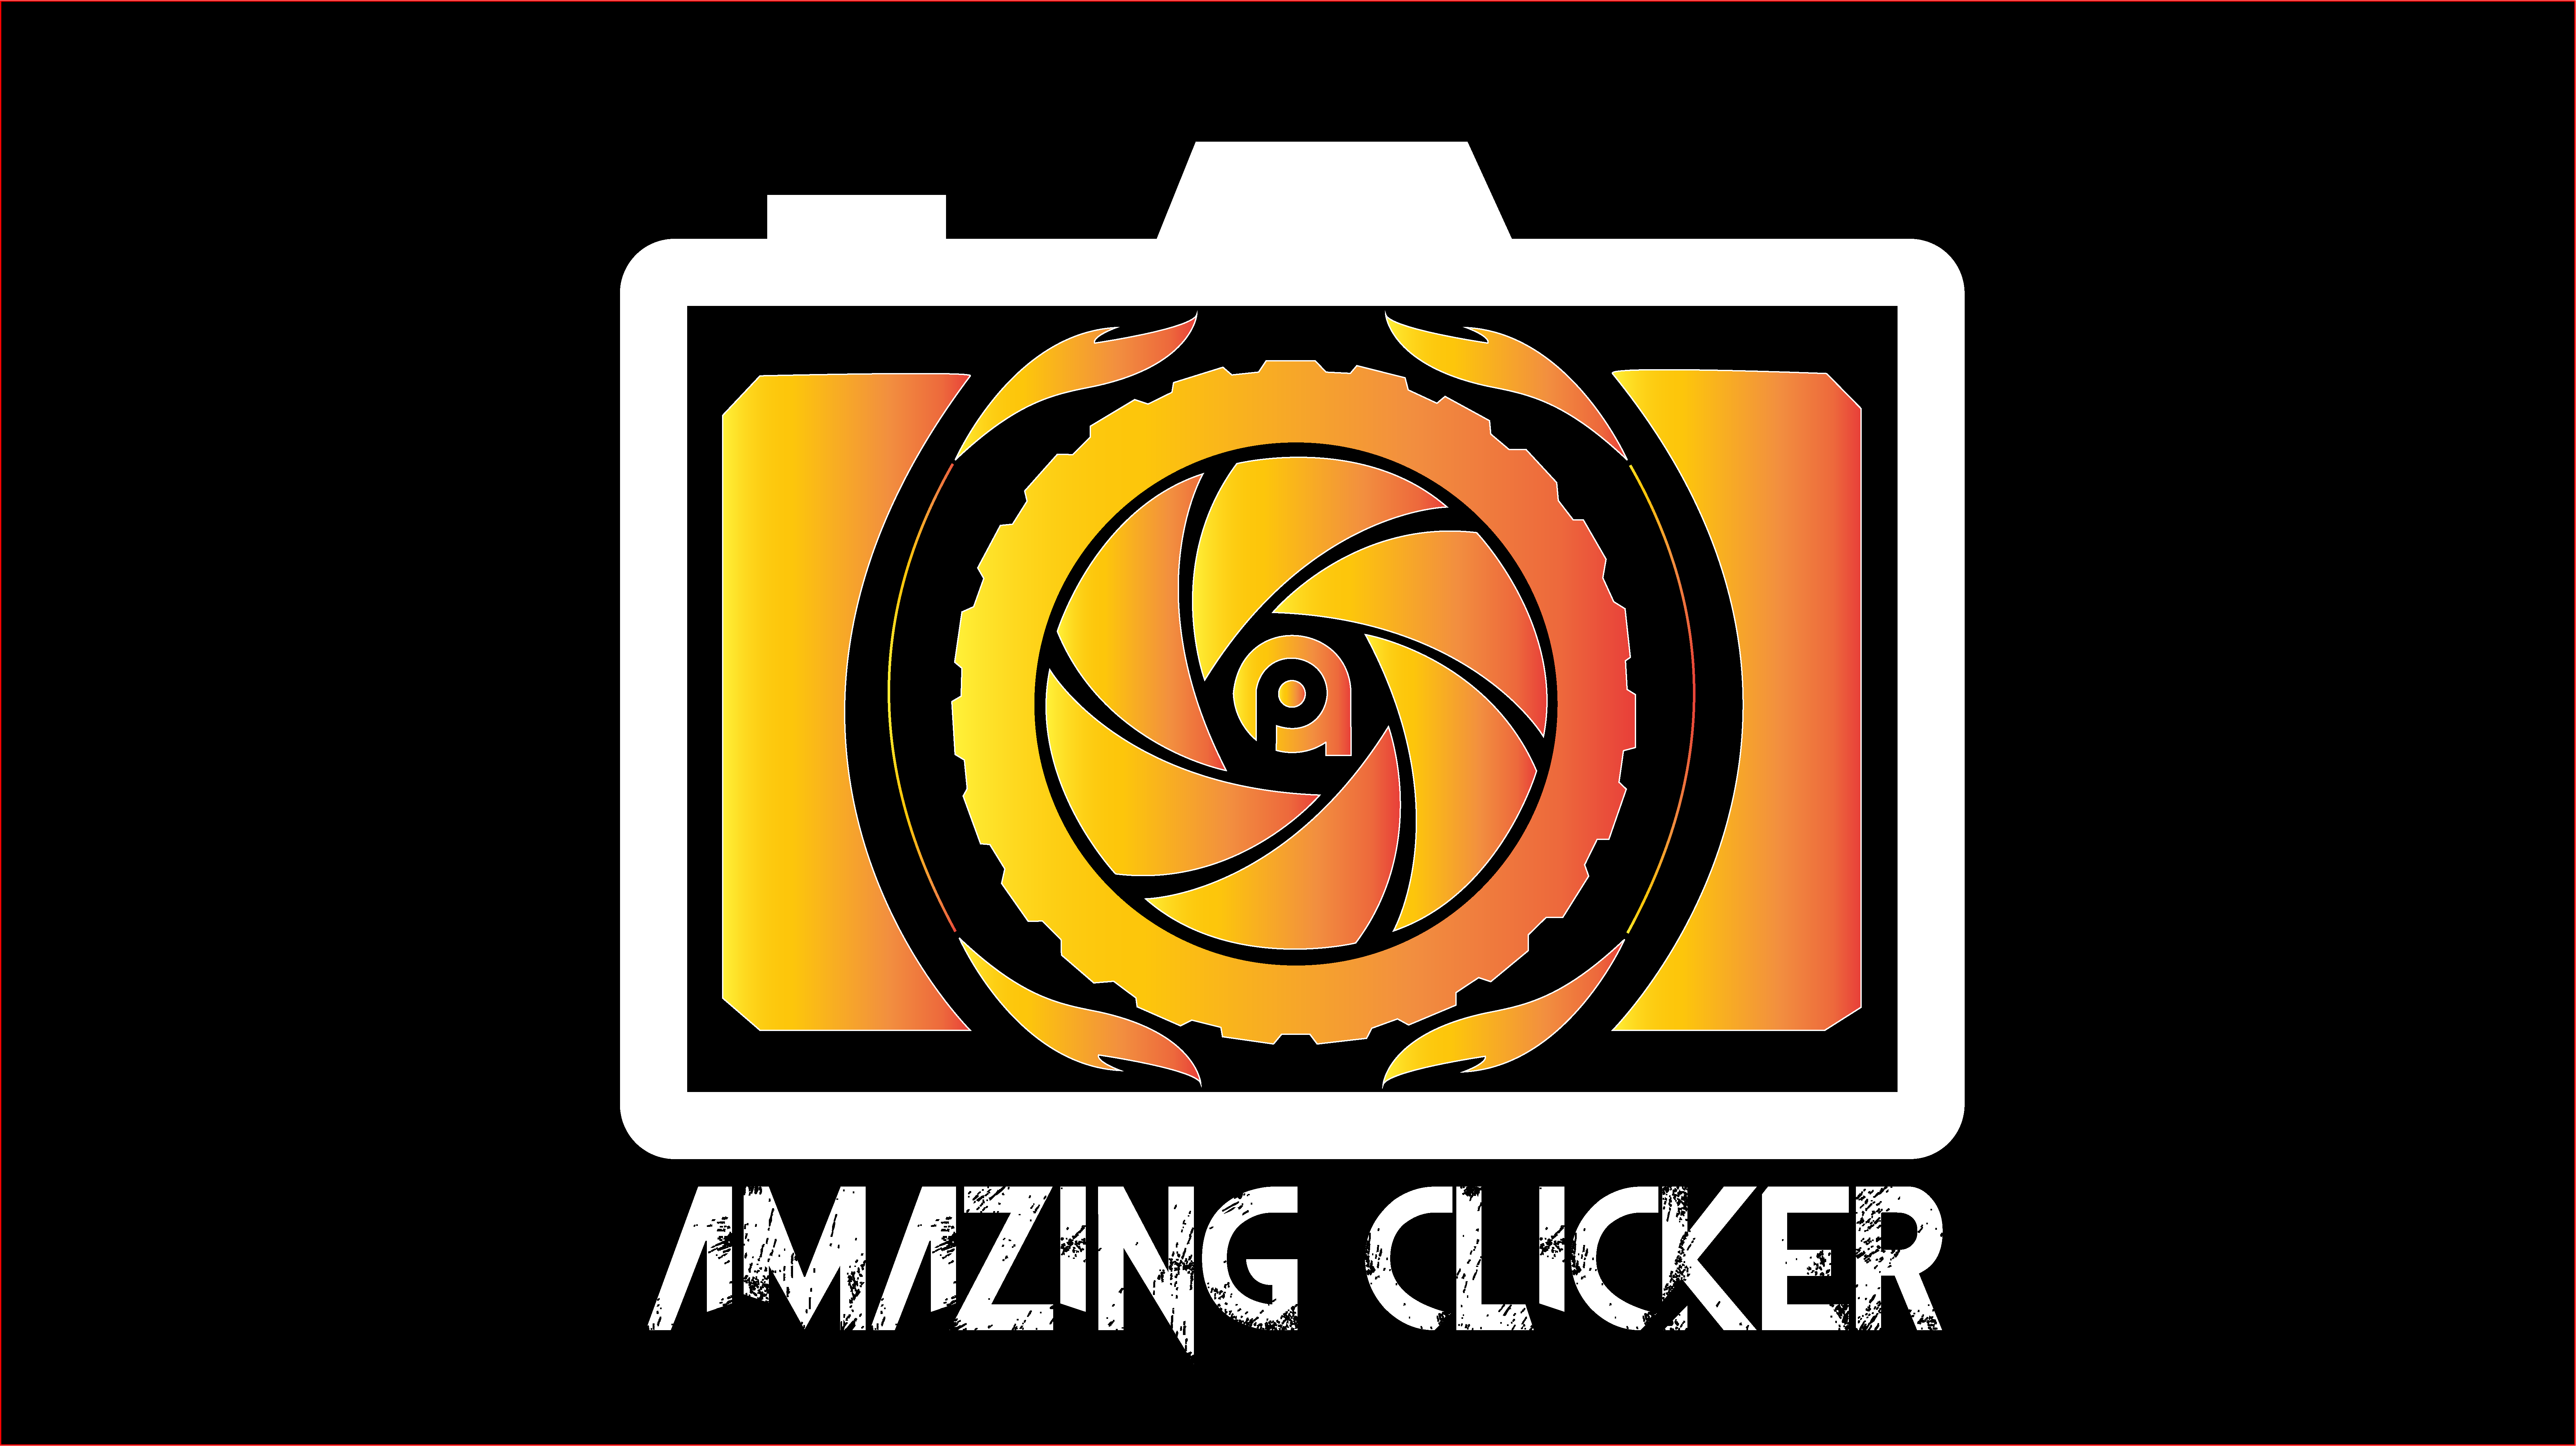 Amazing Clicker|Accounting Services|Professional Services